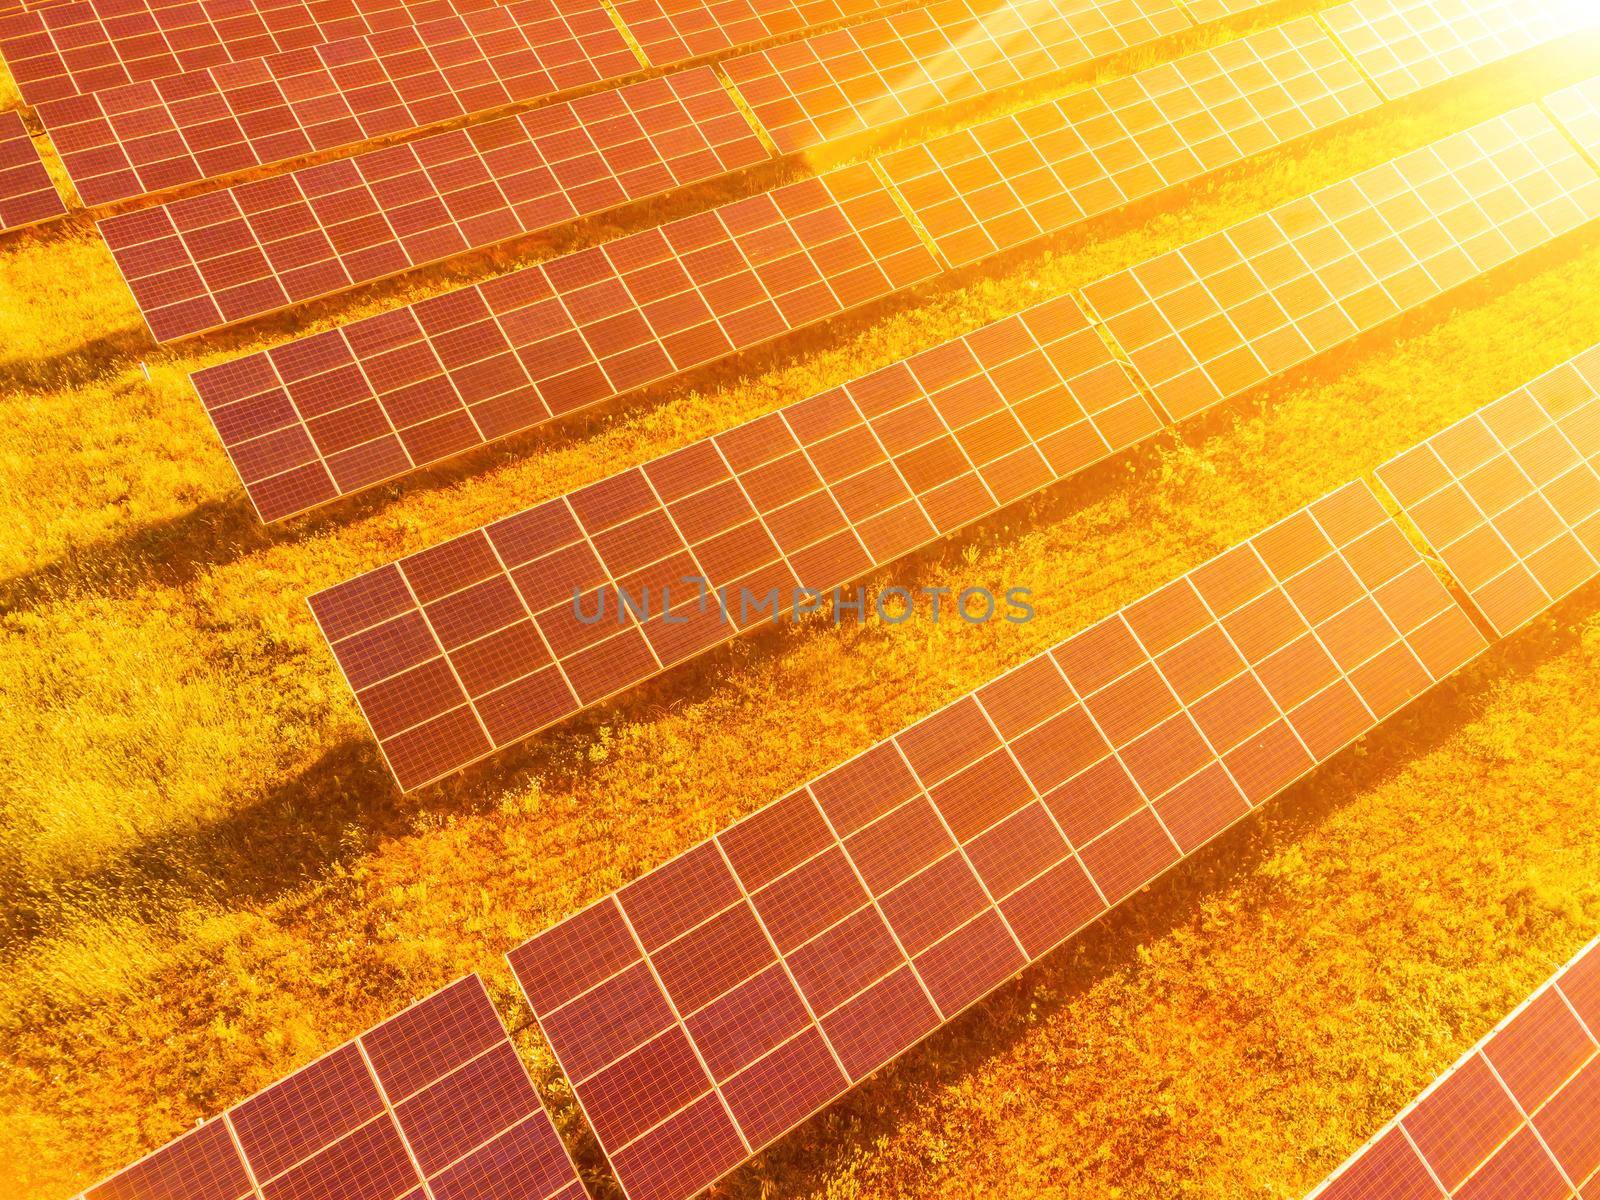 Aerial top view of a solar panels power plant. Photovoltaic solar panels at sunrise and sunset in countryside from above. Modern technology, climate care, earth saving, renewable energy concept. by panophotograph